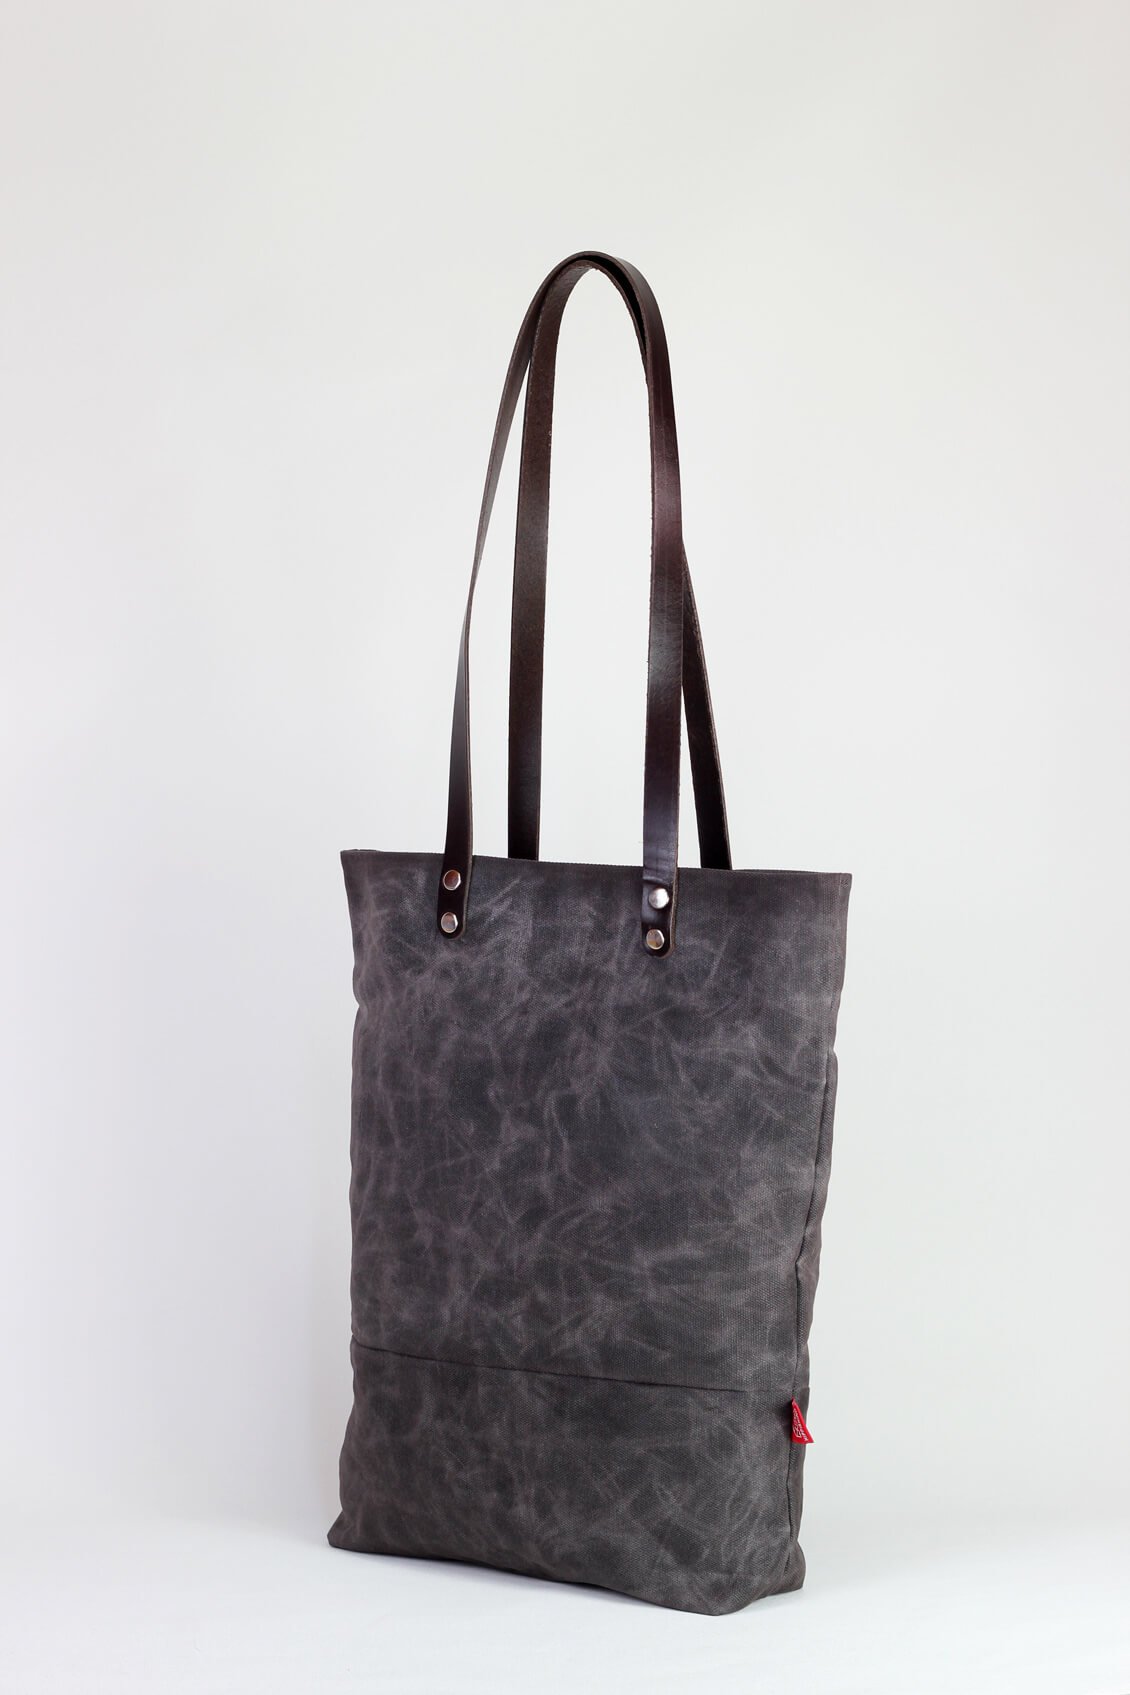 Dark brown waxed canvas tote bag with leather strap shoulder use magnetic snap closure fully ...